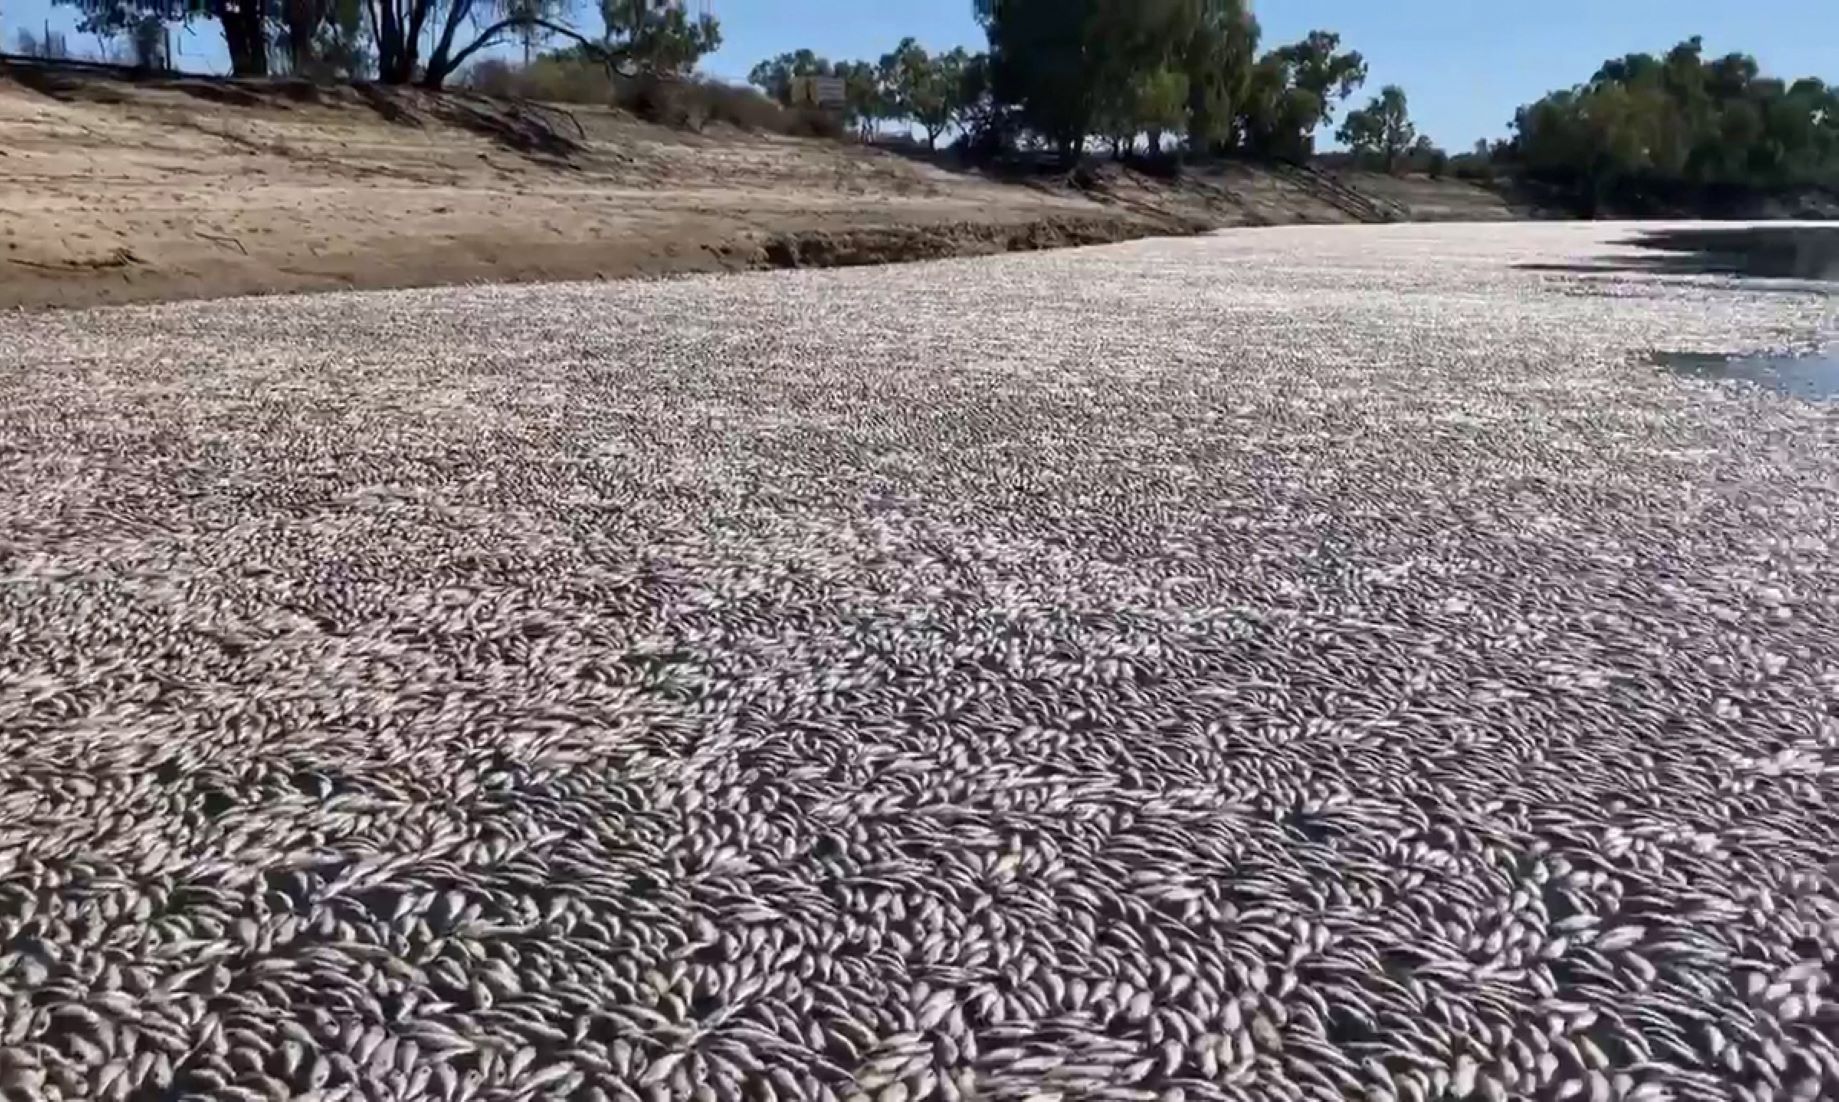 Emergency Operations Centre Activated, Following Mass Fish Deaths In Australian State